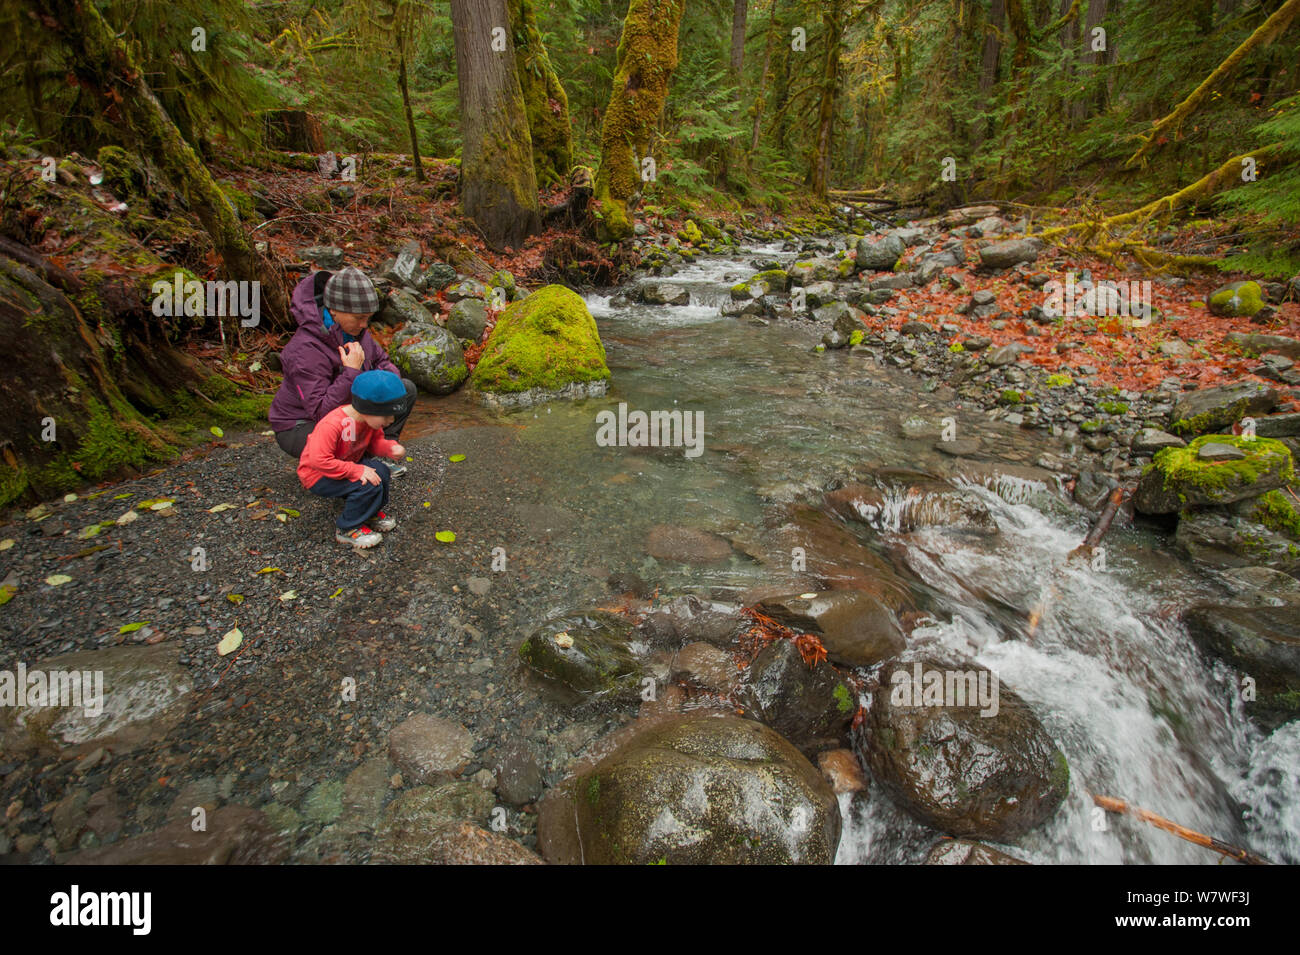 Young toddler boy floats leaves on a creek in the rainforest with his mother, North Fork Skokomish River, Olympic Peninsula, south-east Olympic National Park, Washington, USA, November 2013. Model released. Stock Photo